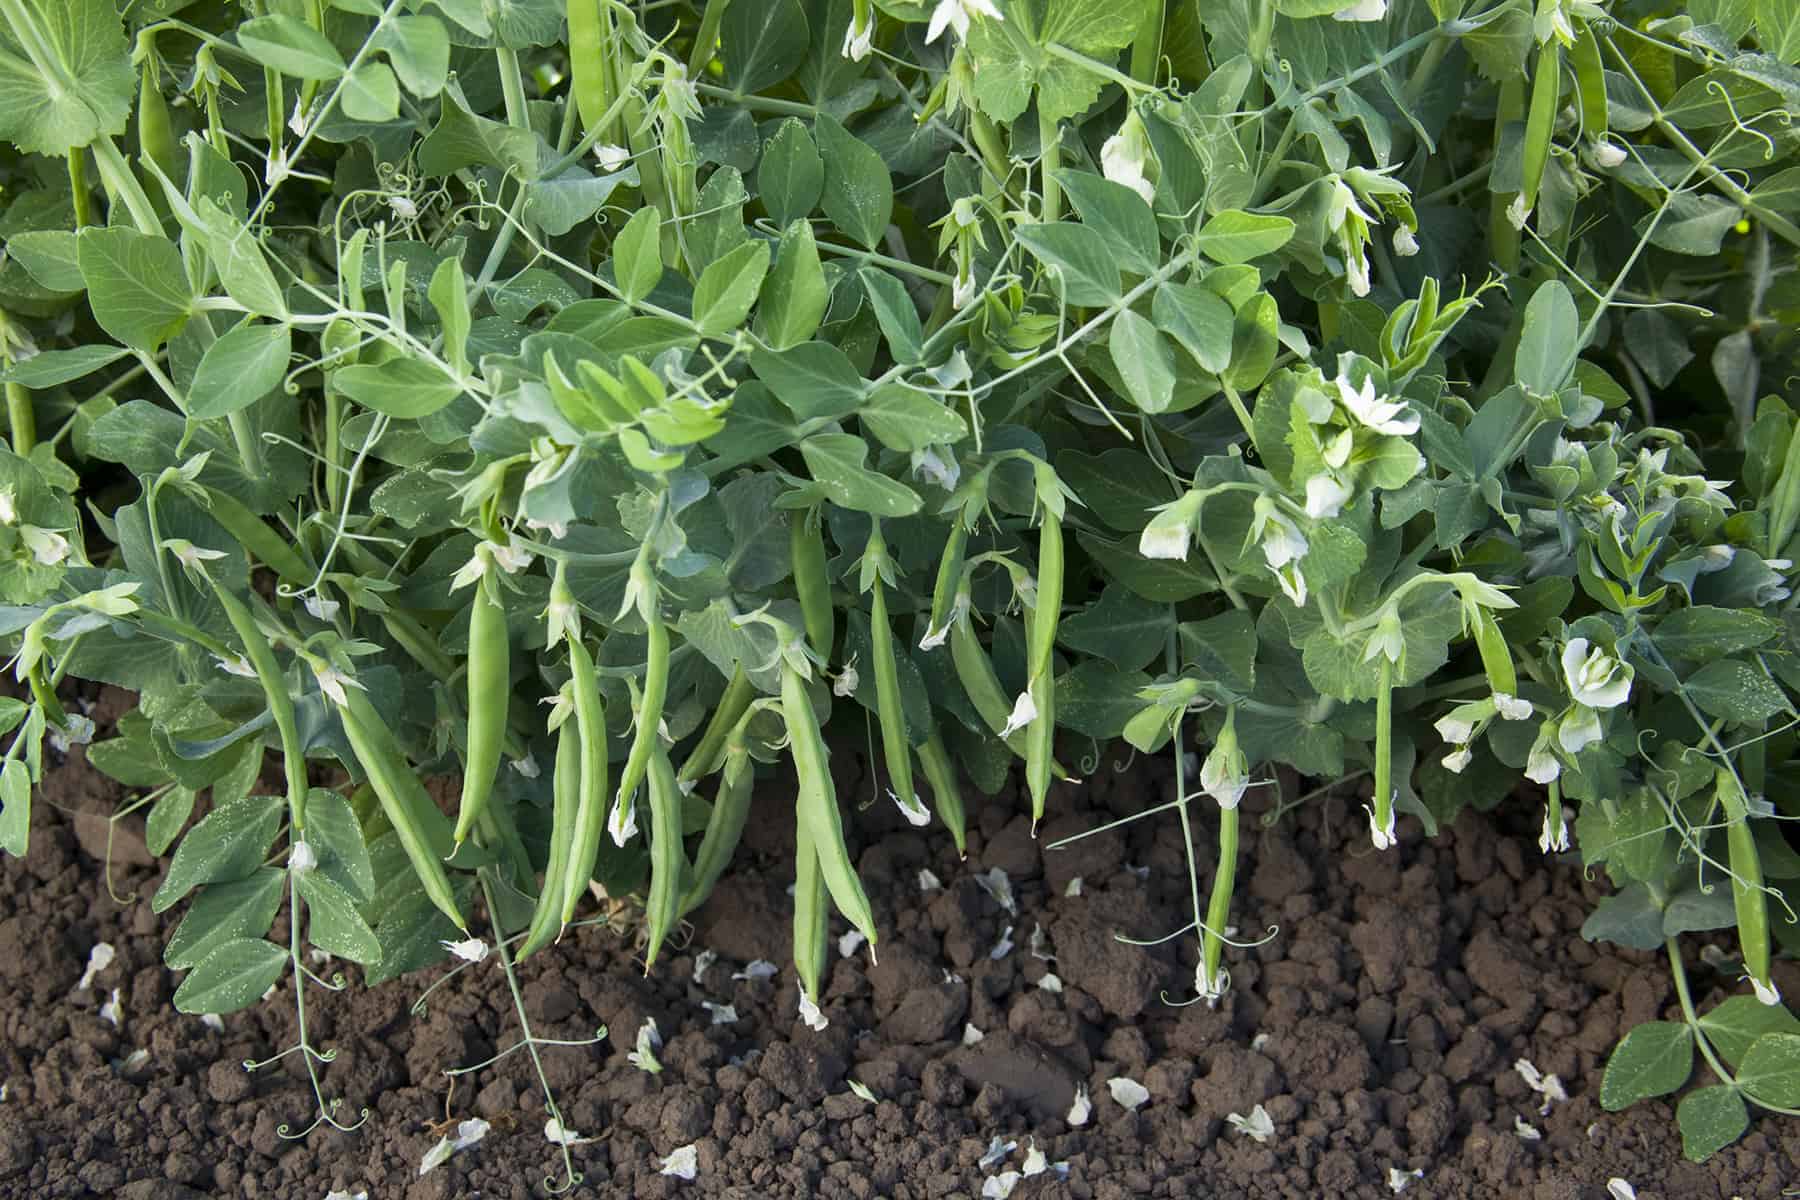 Snak Hero is a new snap pea variety being evaluated by gardeners in North Dakota. (Photo courtesy of All-America Selections)